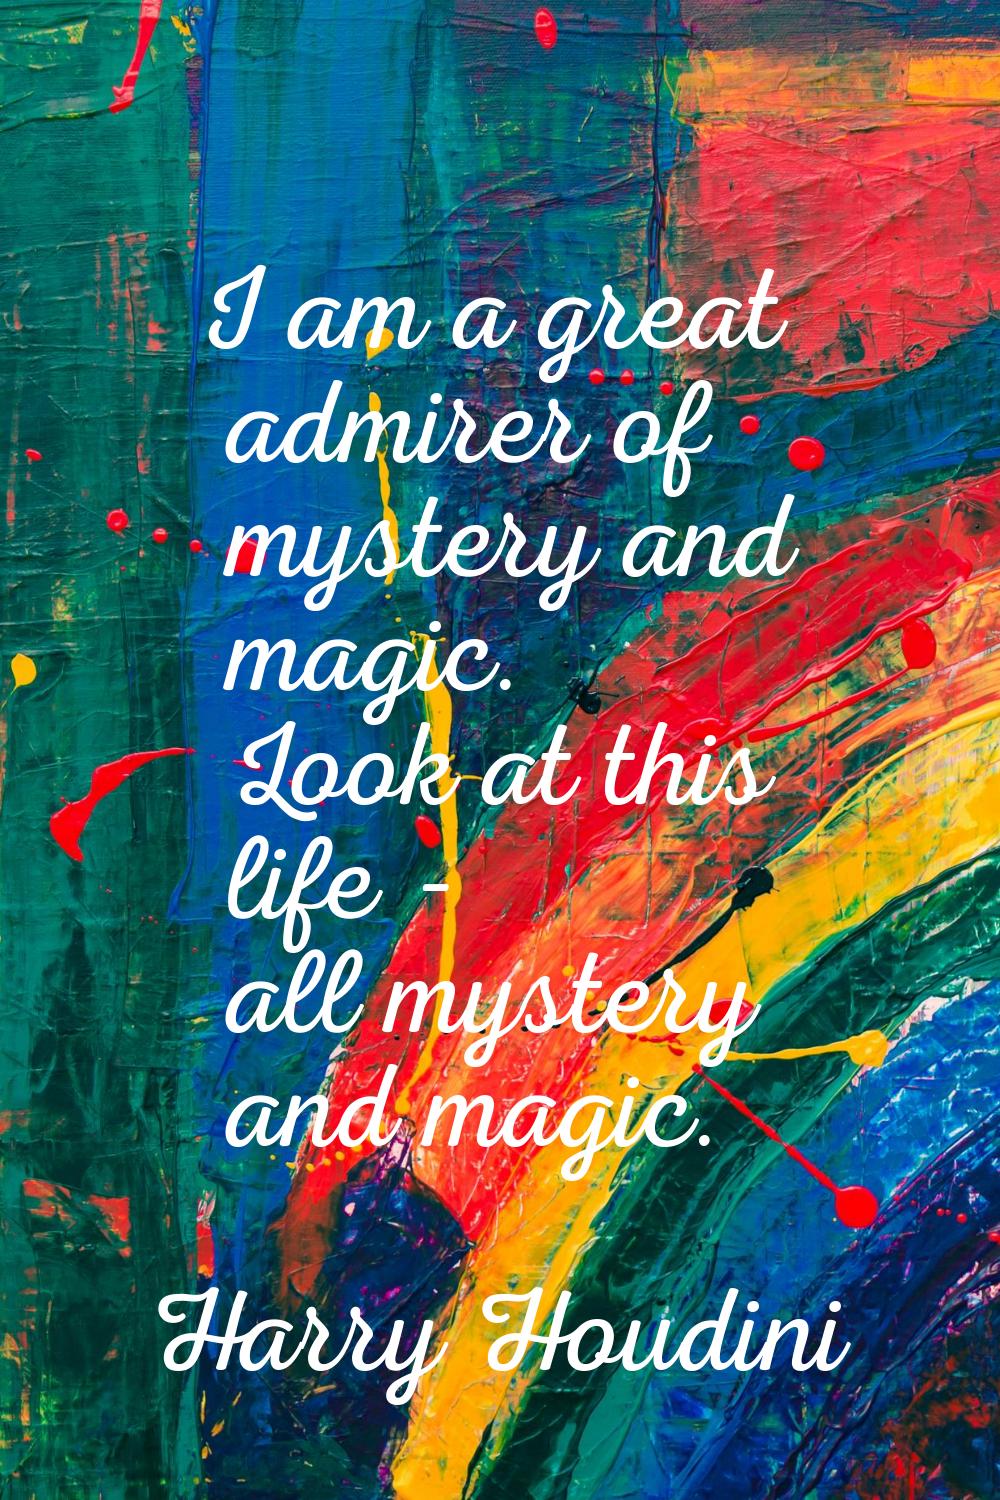 I am a great admirer of mystery and magic. Look at this life - all mystery and magic.